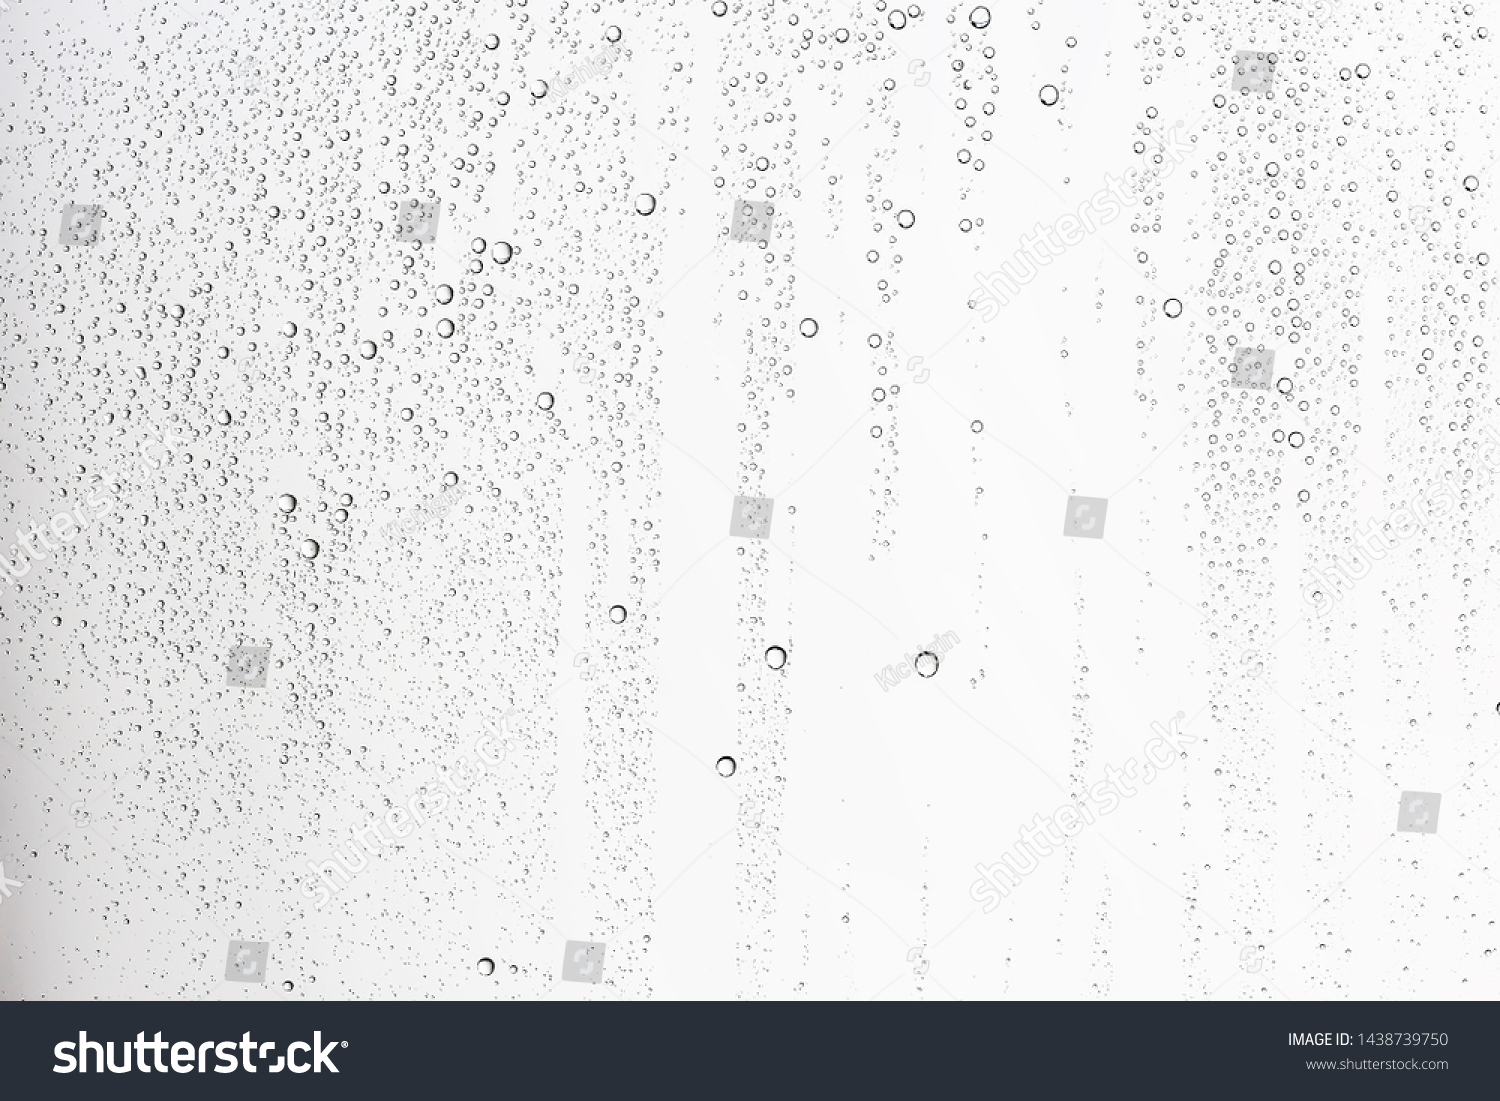 white isolated background water drops on the glass / wet window glass with splashes and drops of water and lime, texture autumn background #1438739750